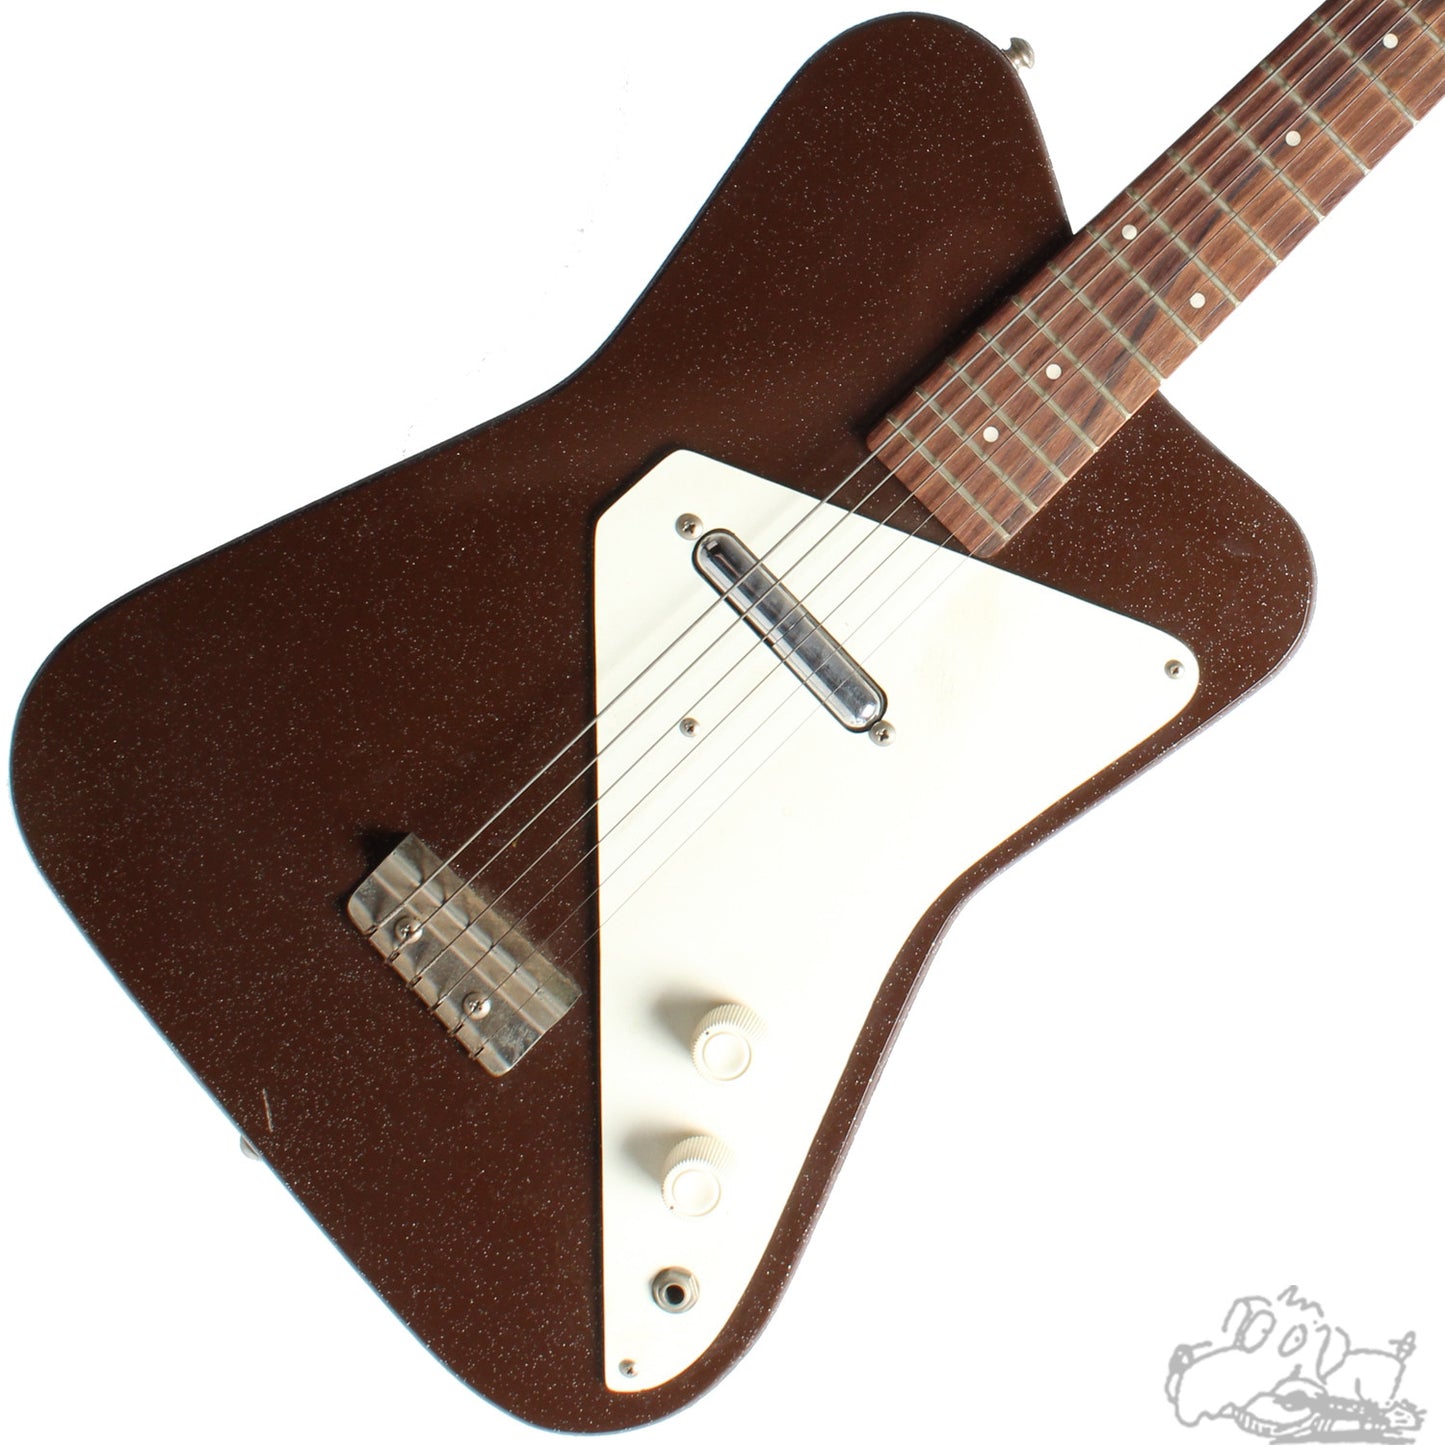 1963 Danelectro Pro 1 owned by Vincent Bell